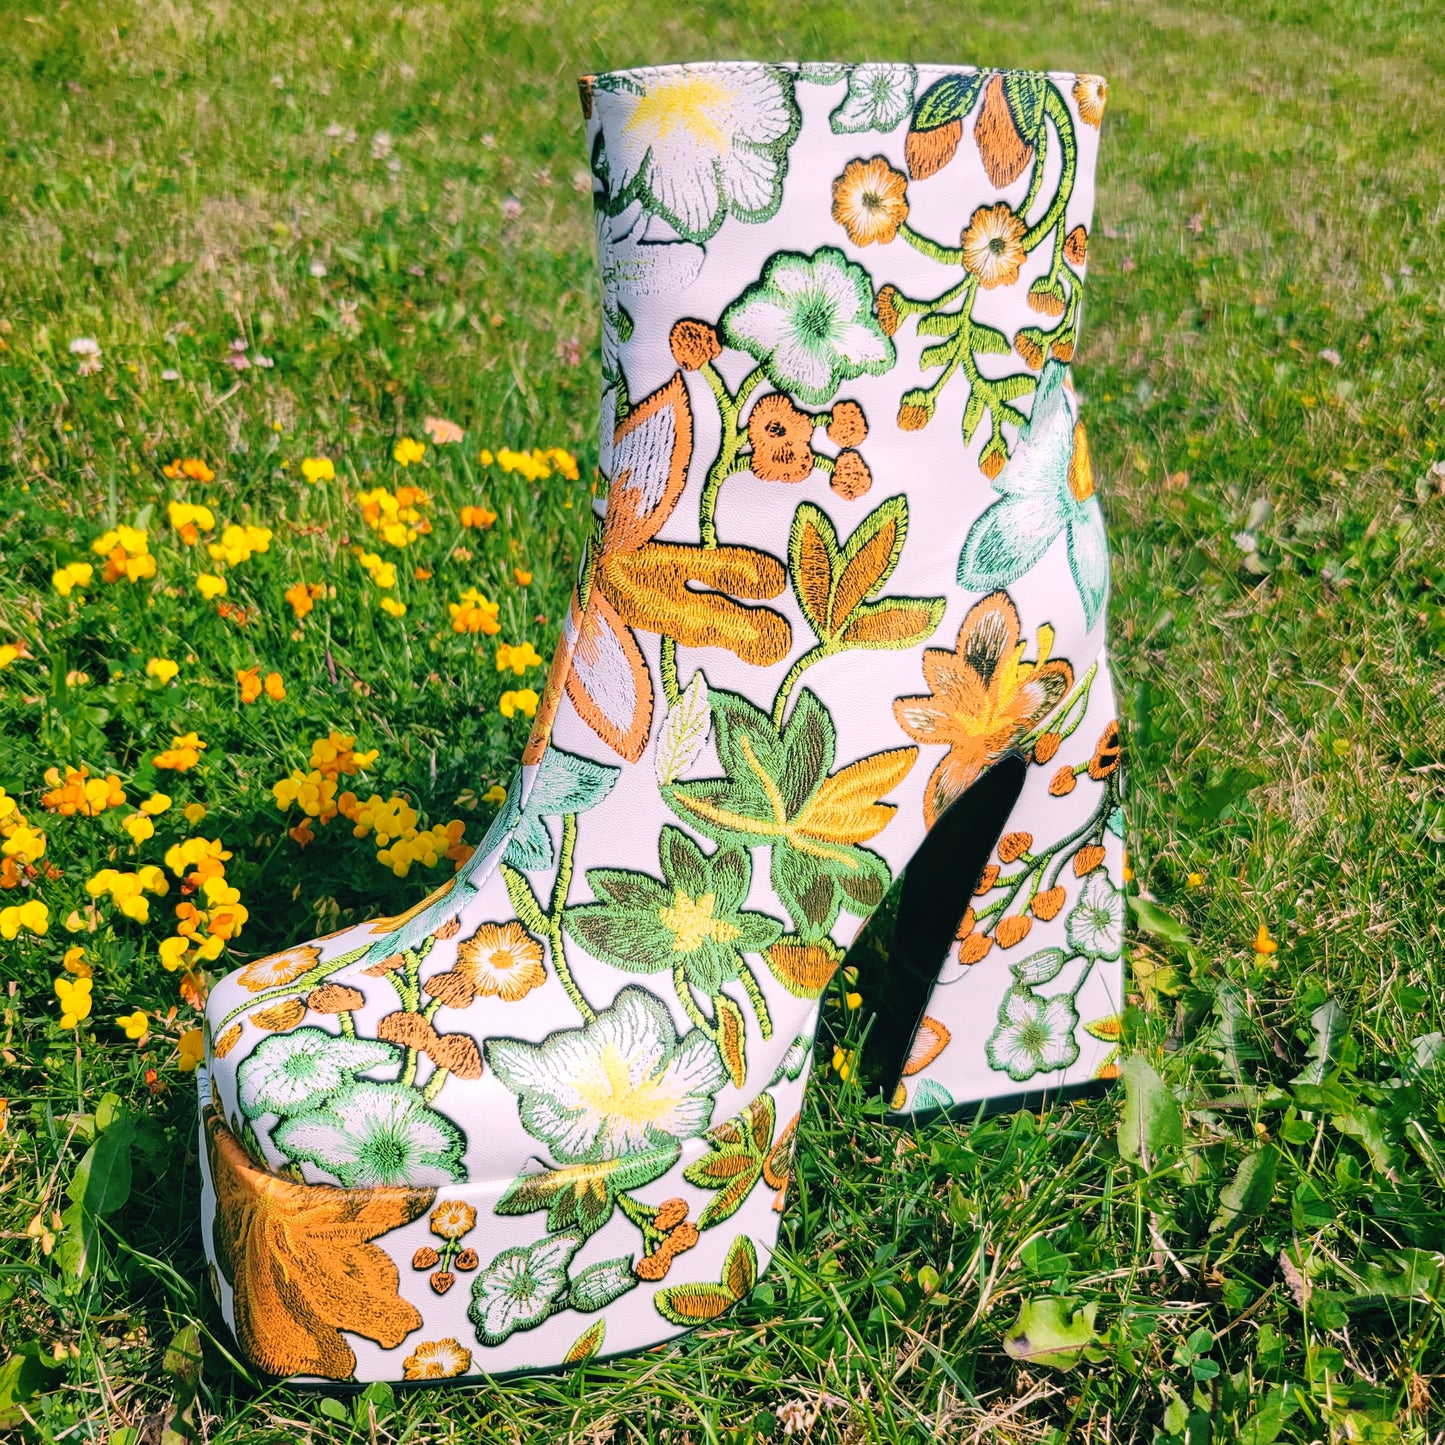 Retro 70's Platform ankle boots with orange and green floral print. Boot on the grass next to buttercup flowers.